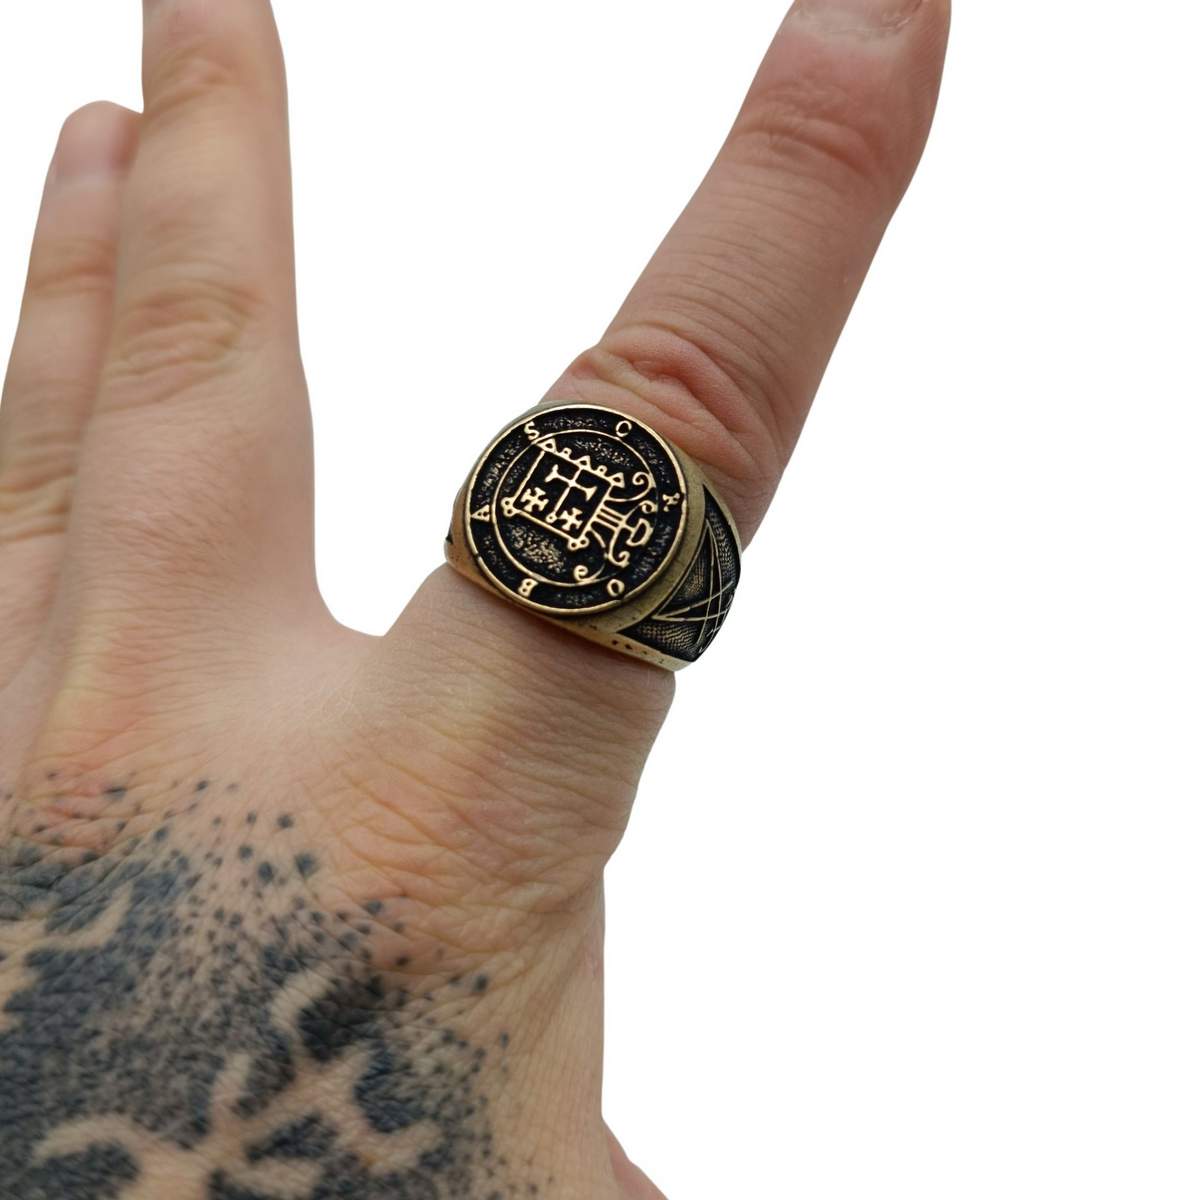 Orobas demon sigil ring from bronze